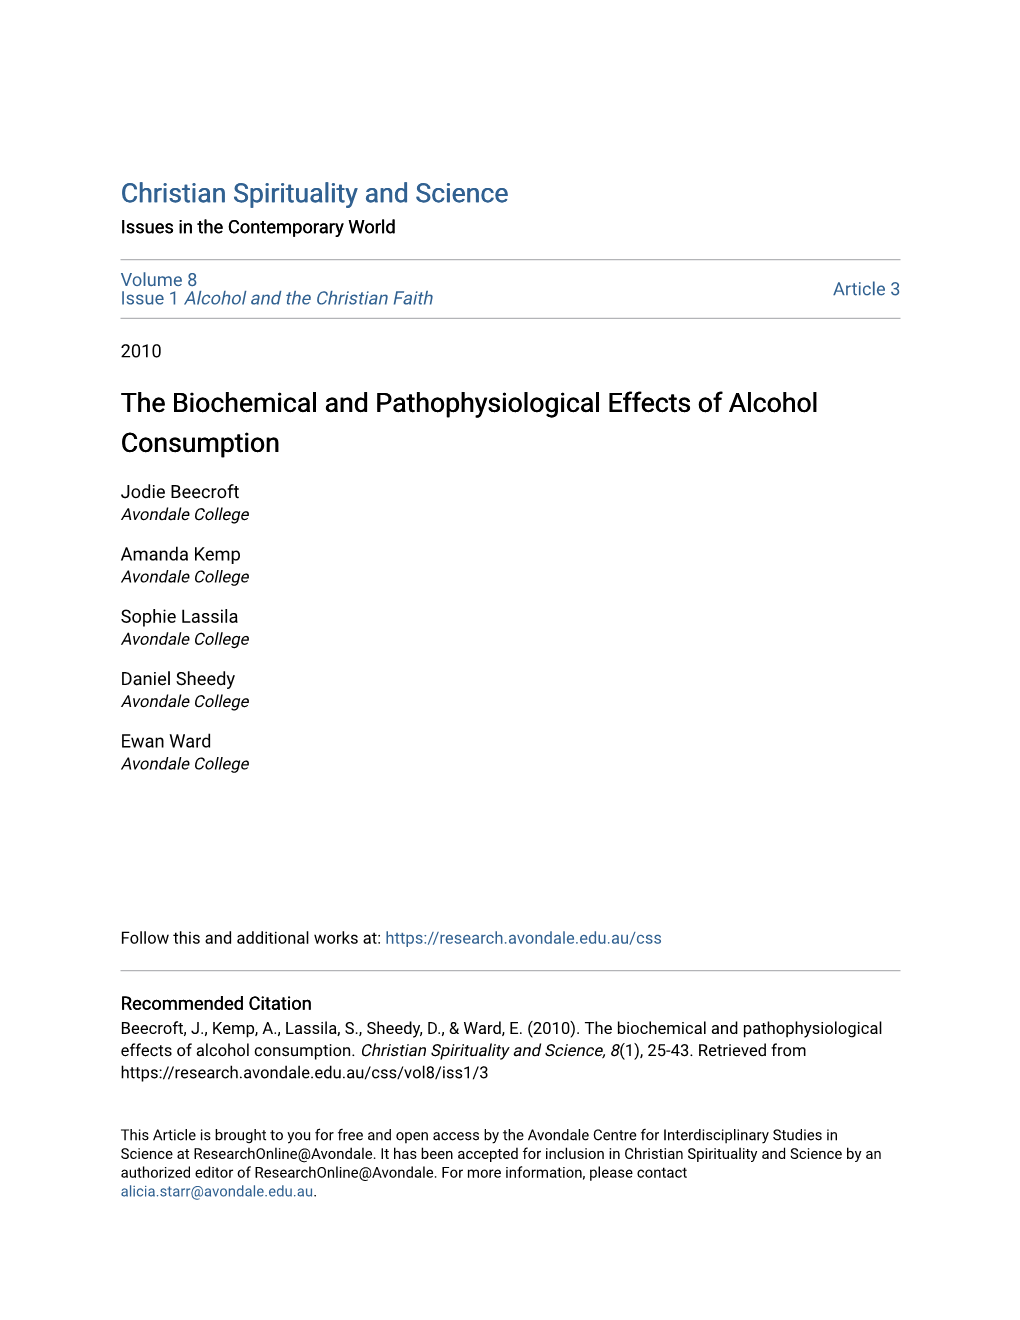 The Biochemical and Pathophysiological Effects of Alcohol Consumption